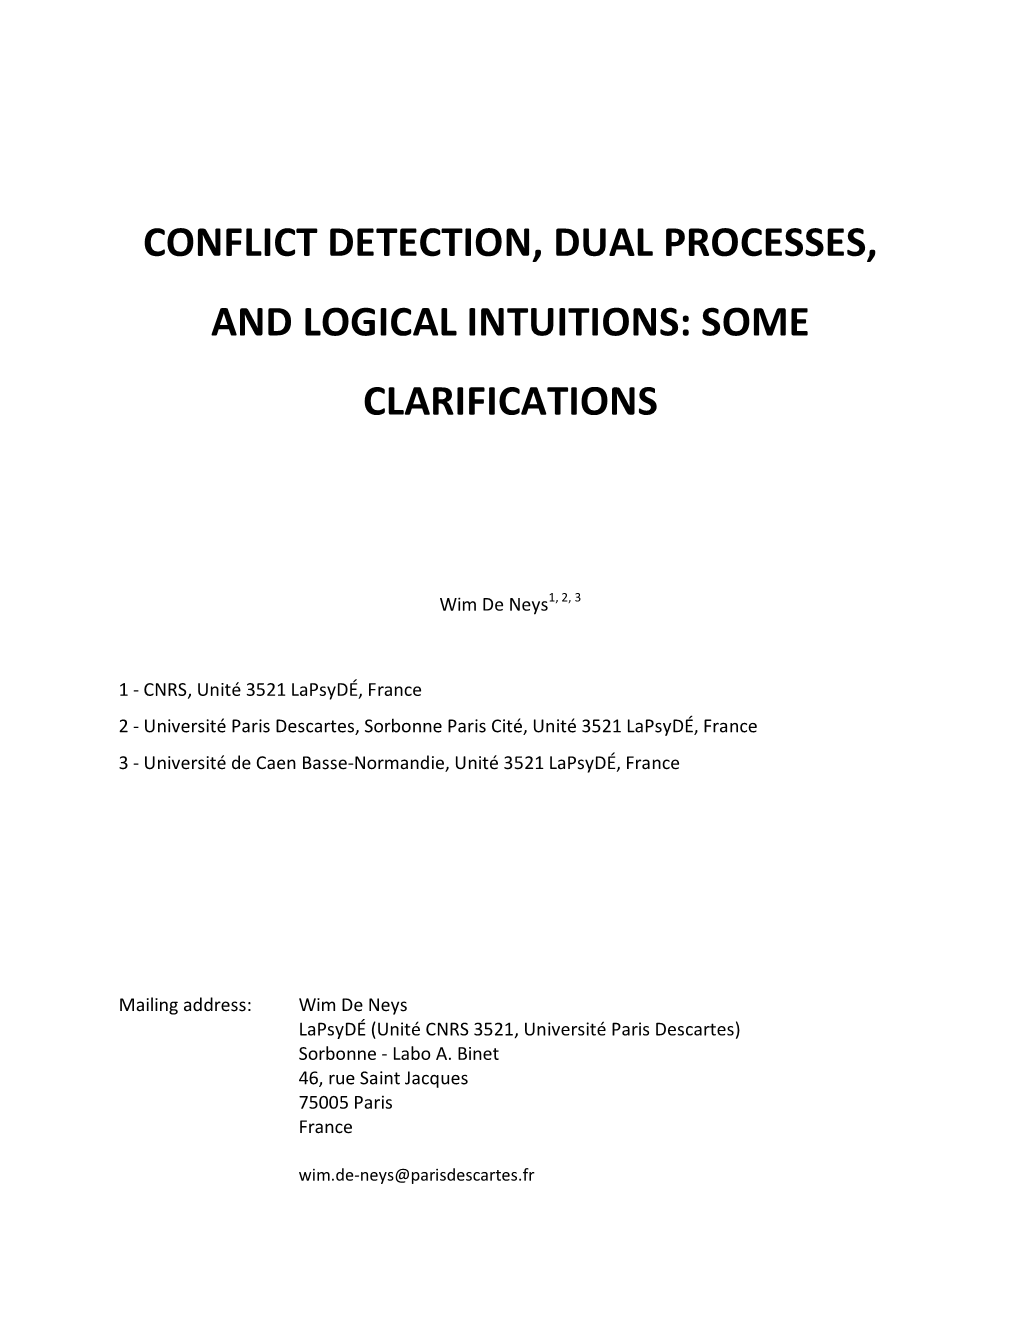 Conflict Detection, Dual Processes, and Logical Intuitions: Some Clarifications